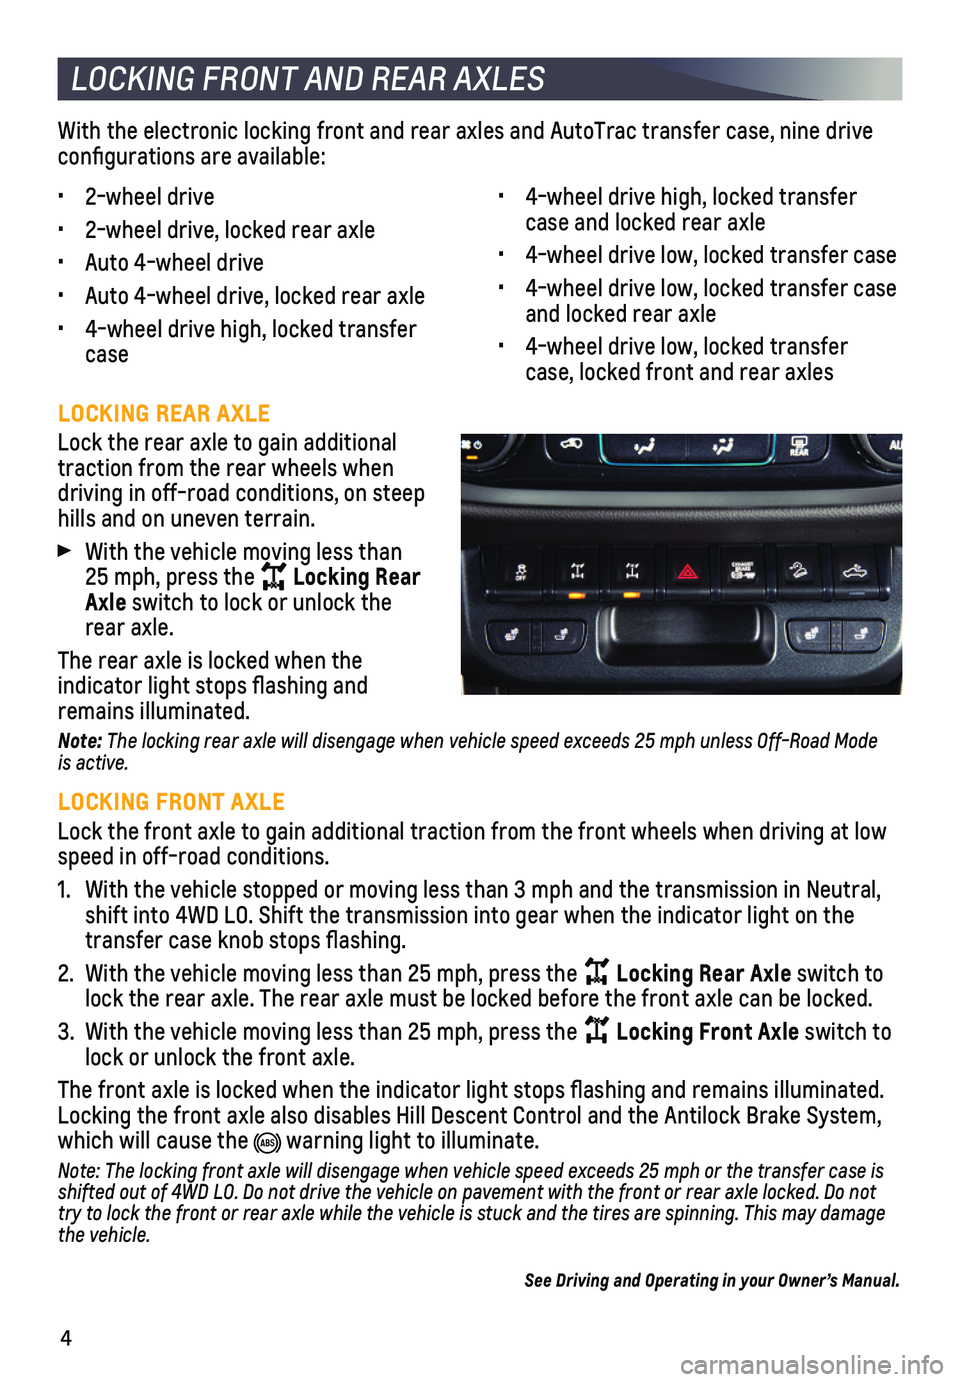 CHEVROLET COLORADO 2021  Get To Know Guide ZR2 4
LOCKING REAR AXLE
Lock the rear axle to gain additional  
traction from the rear wheels when  
driving in off-road conditions, on steep hills and on uneven terrain.
 With the vehicle moving less tha